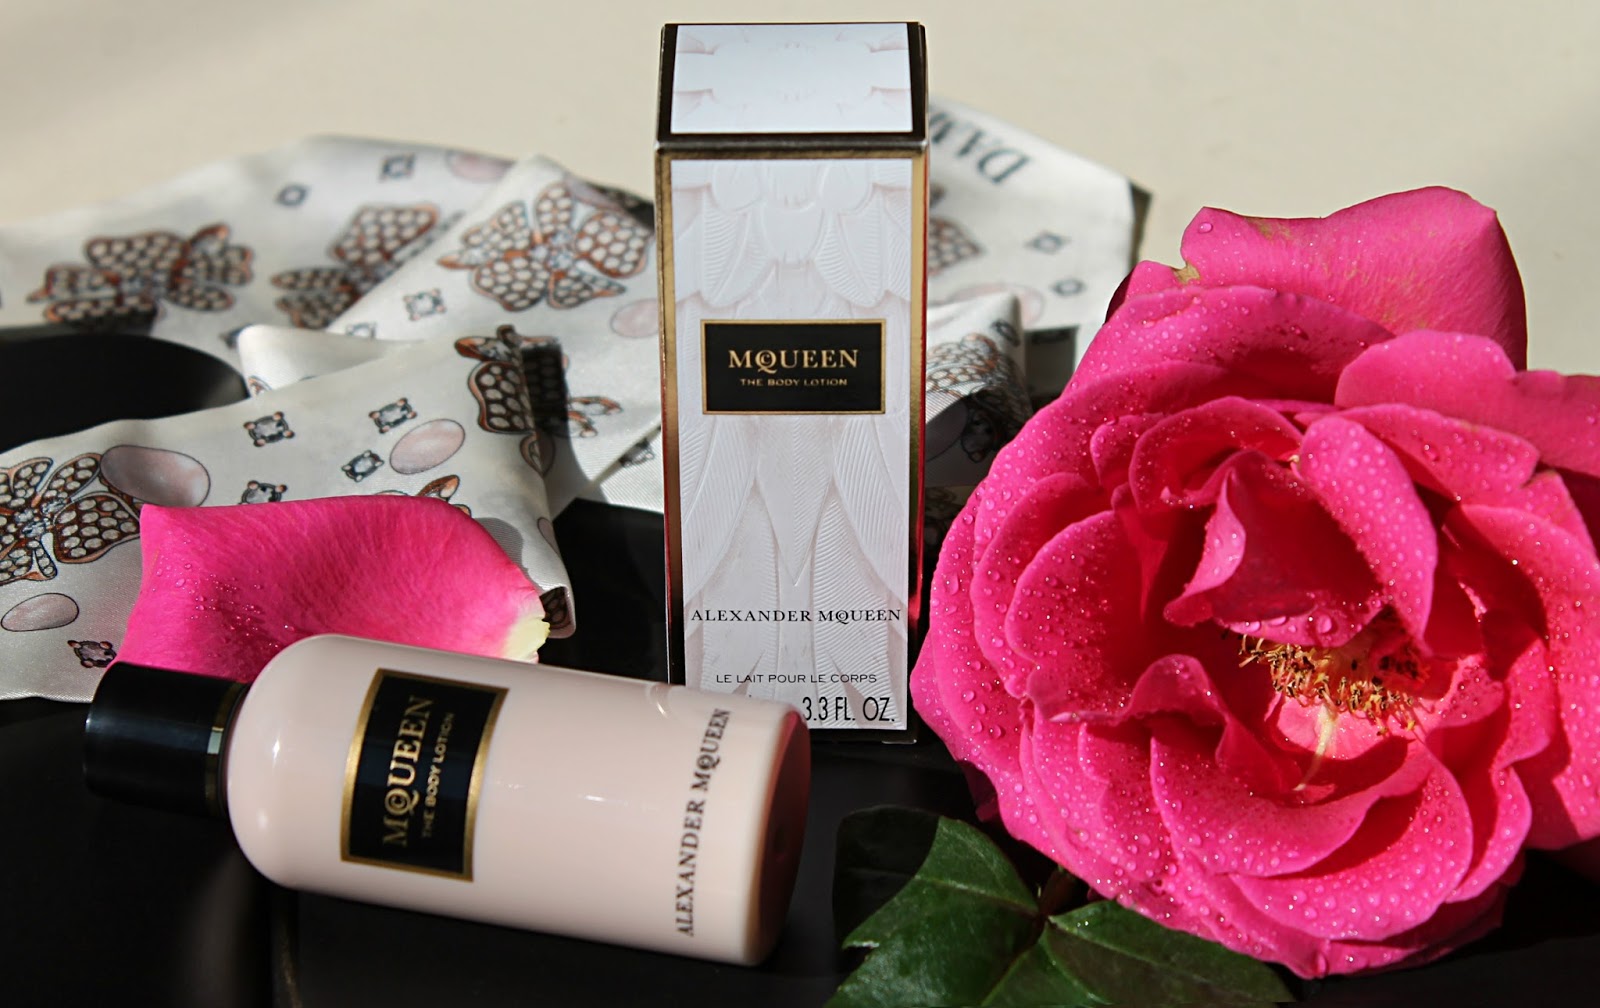 mcqueen the body lotion